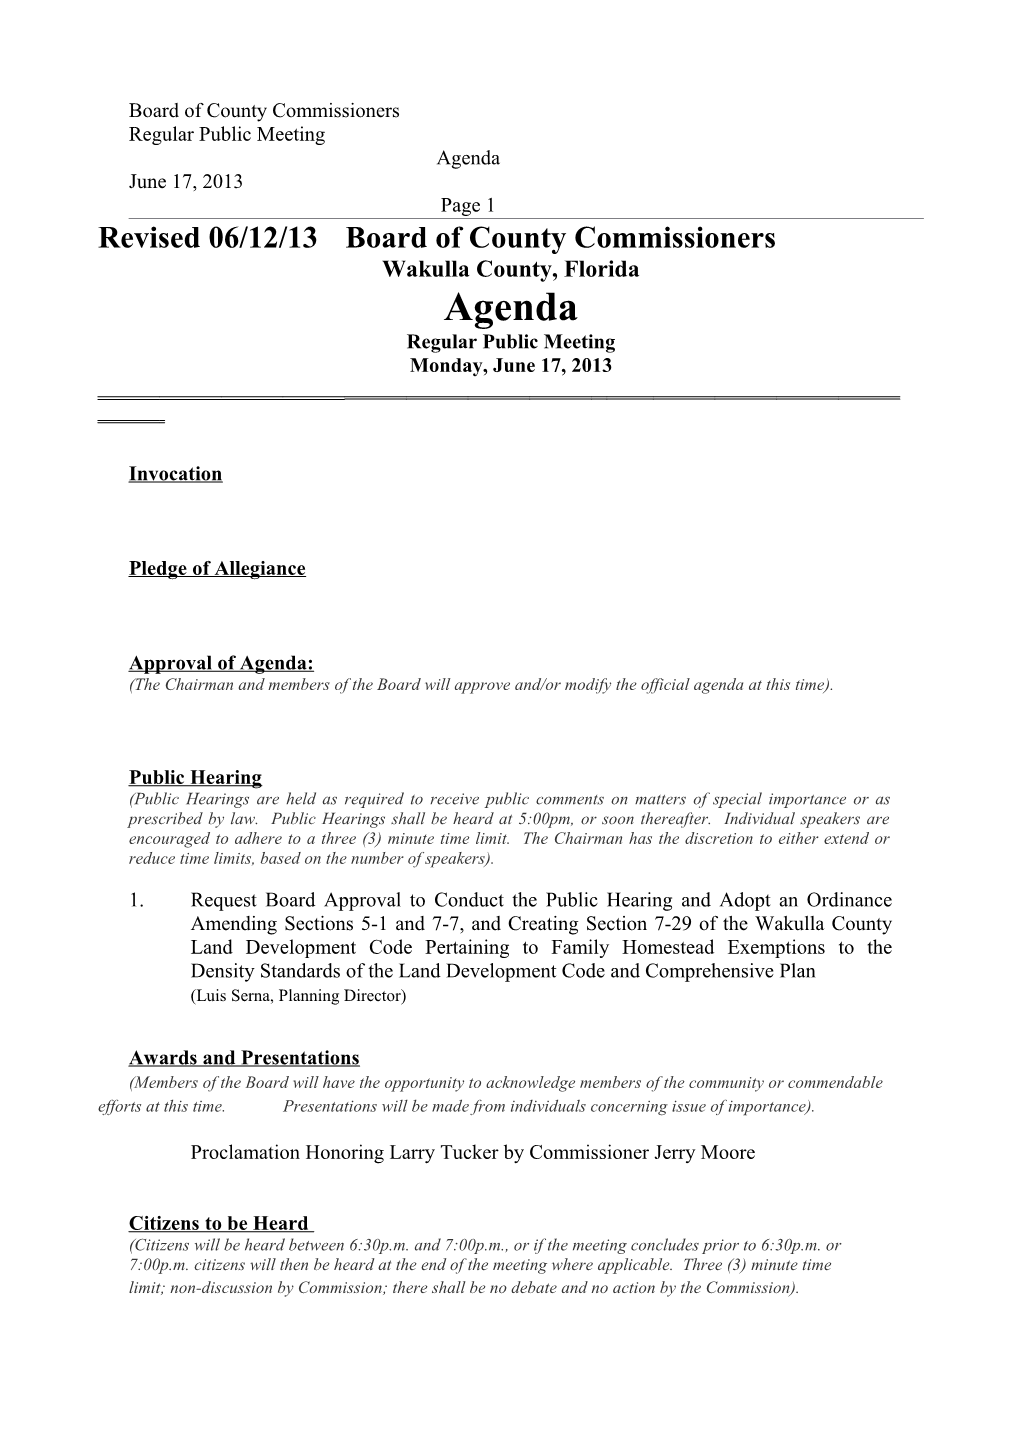 Board of County Commissioners s13